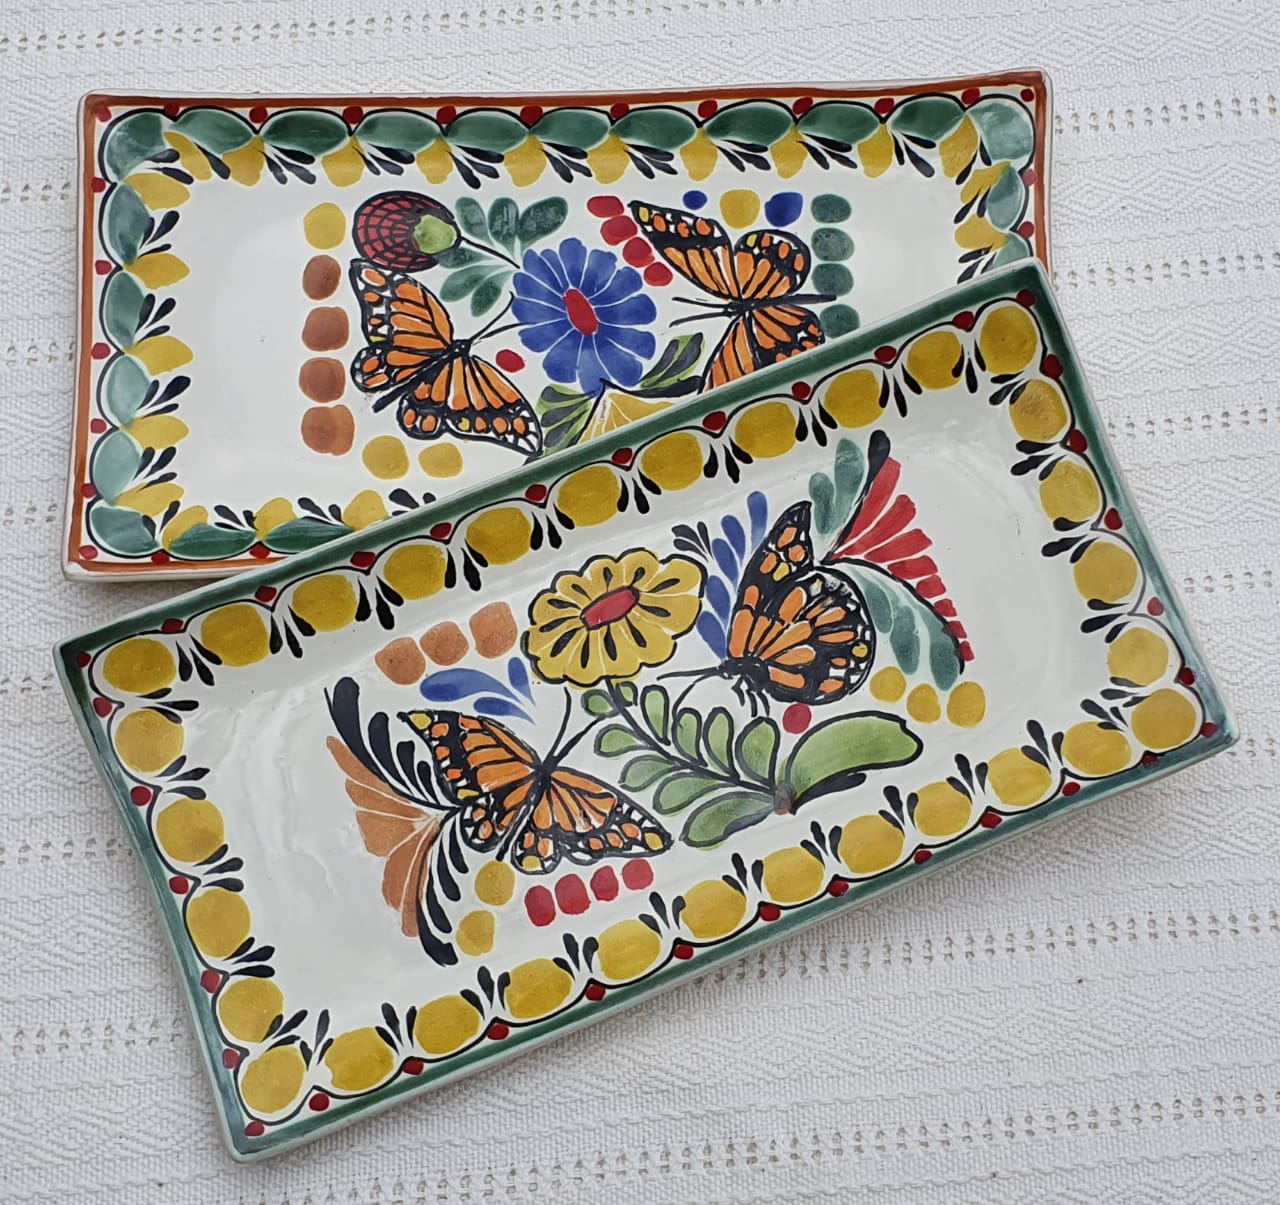 Butterfly Tray / Rectangular Plate Set of 2 (Pieces) Multicolors